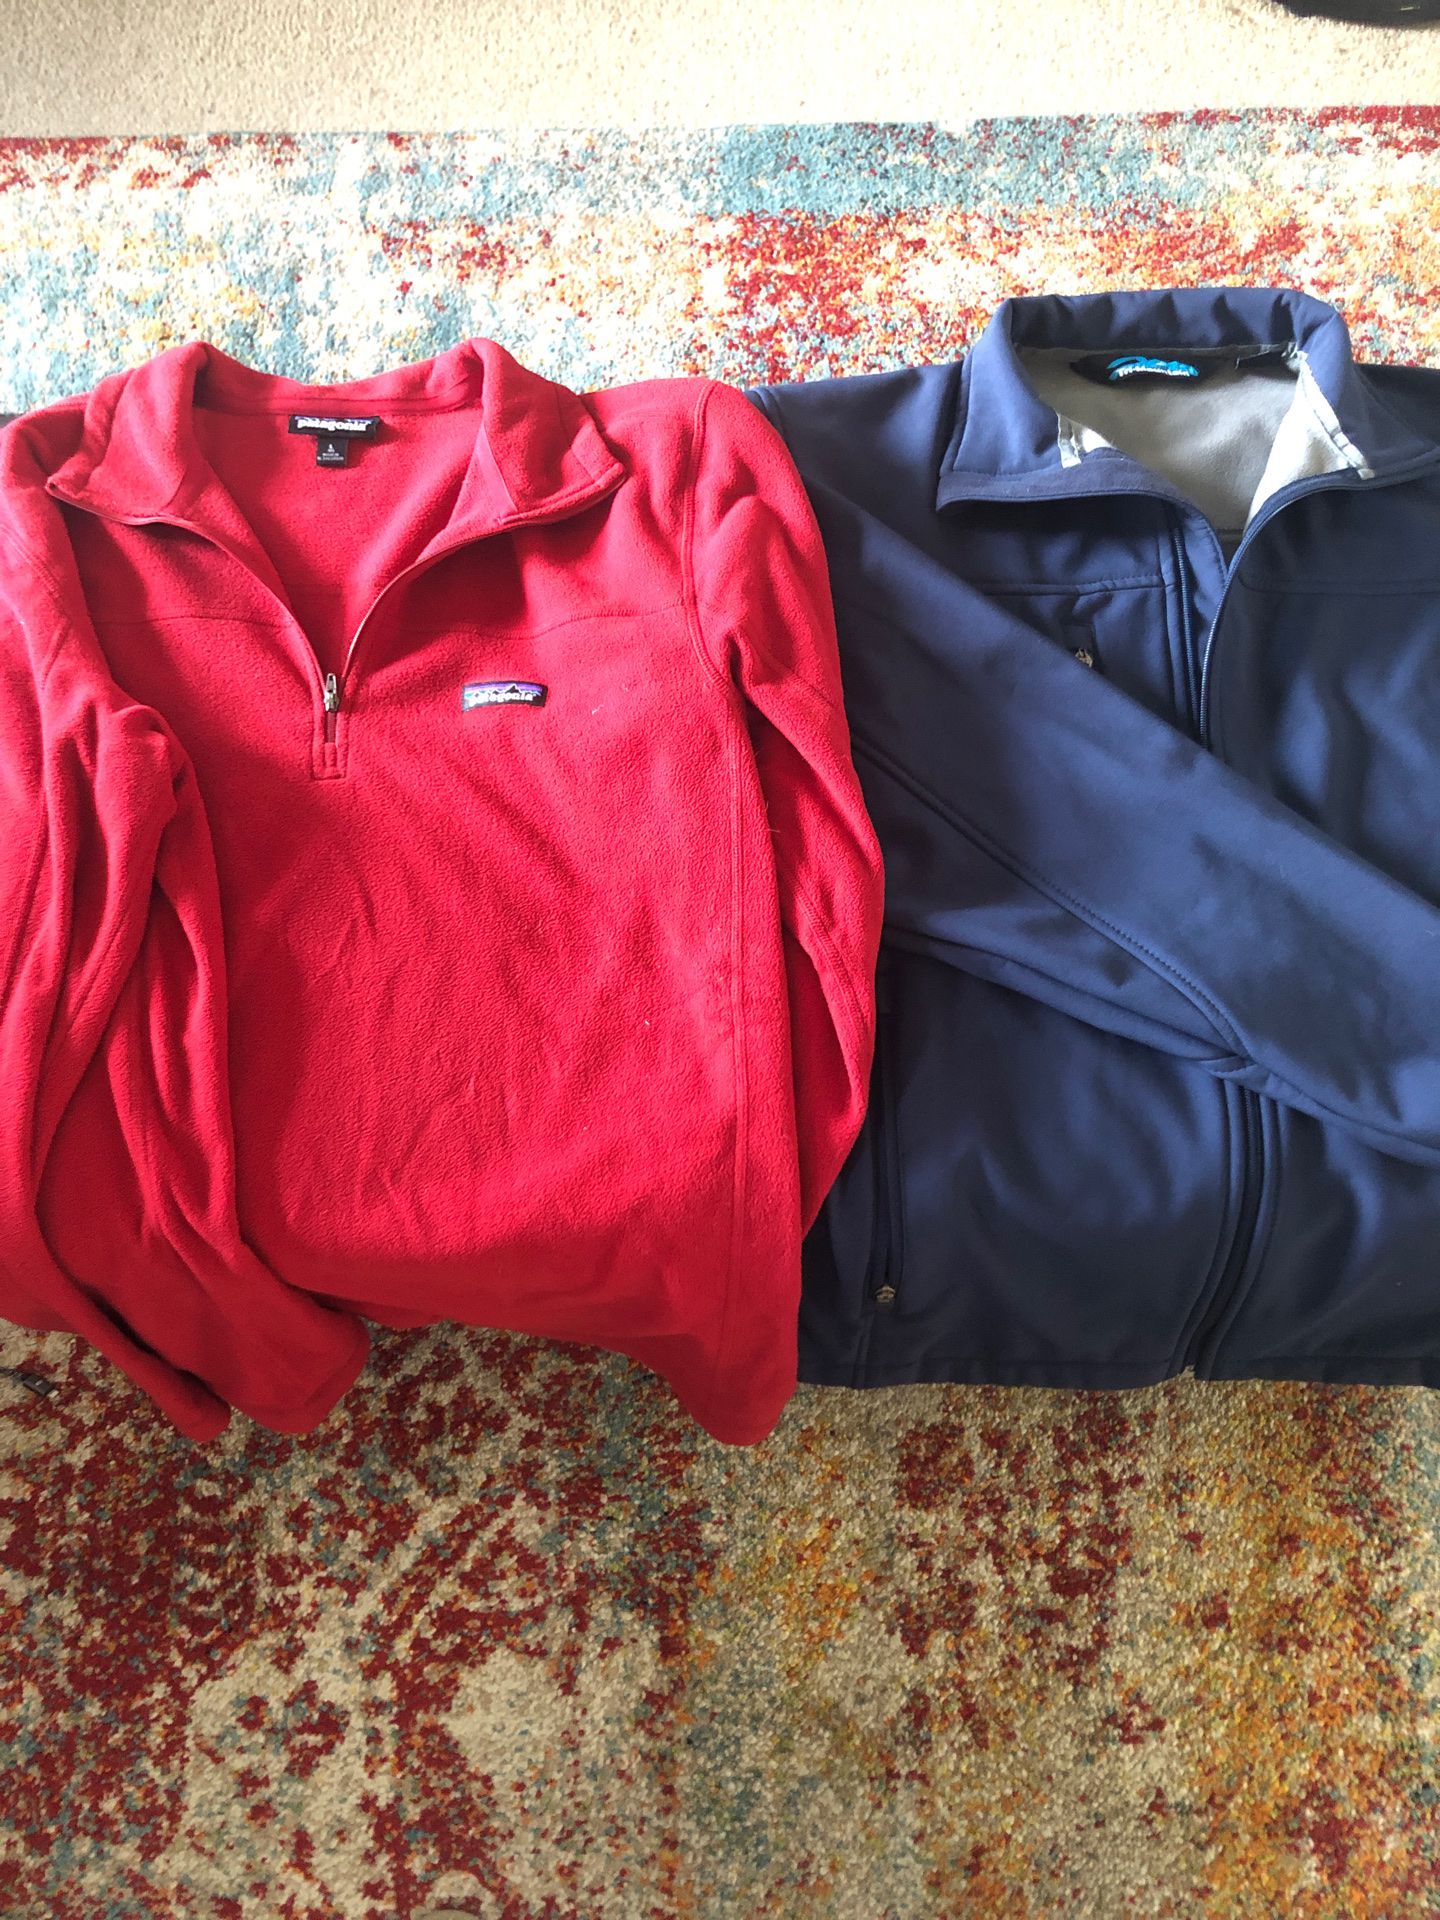 Patagonia and Tri-mountain Men’s coats/pullover